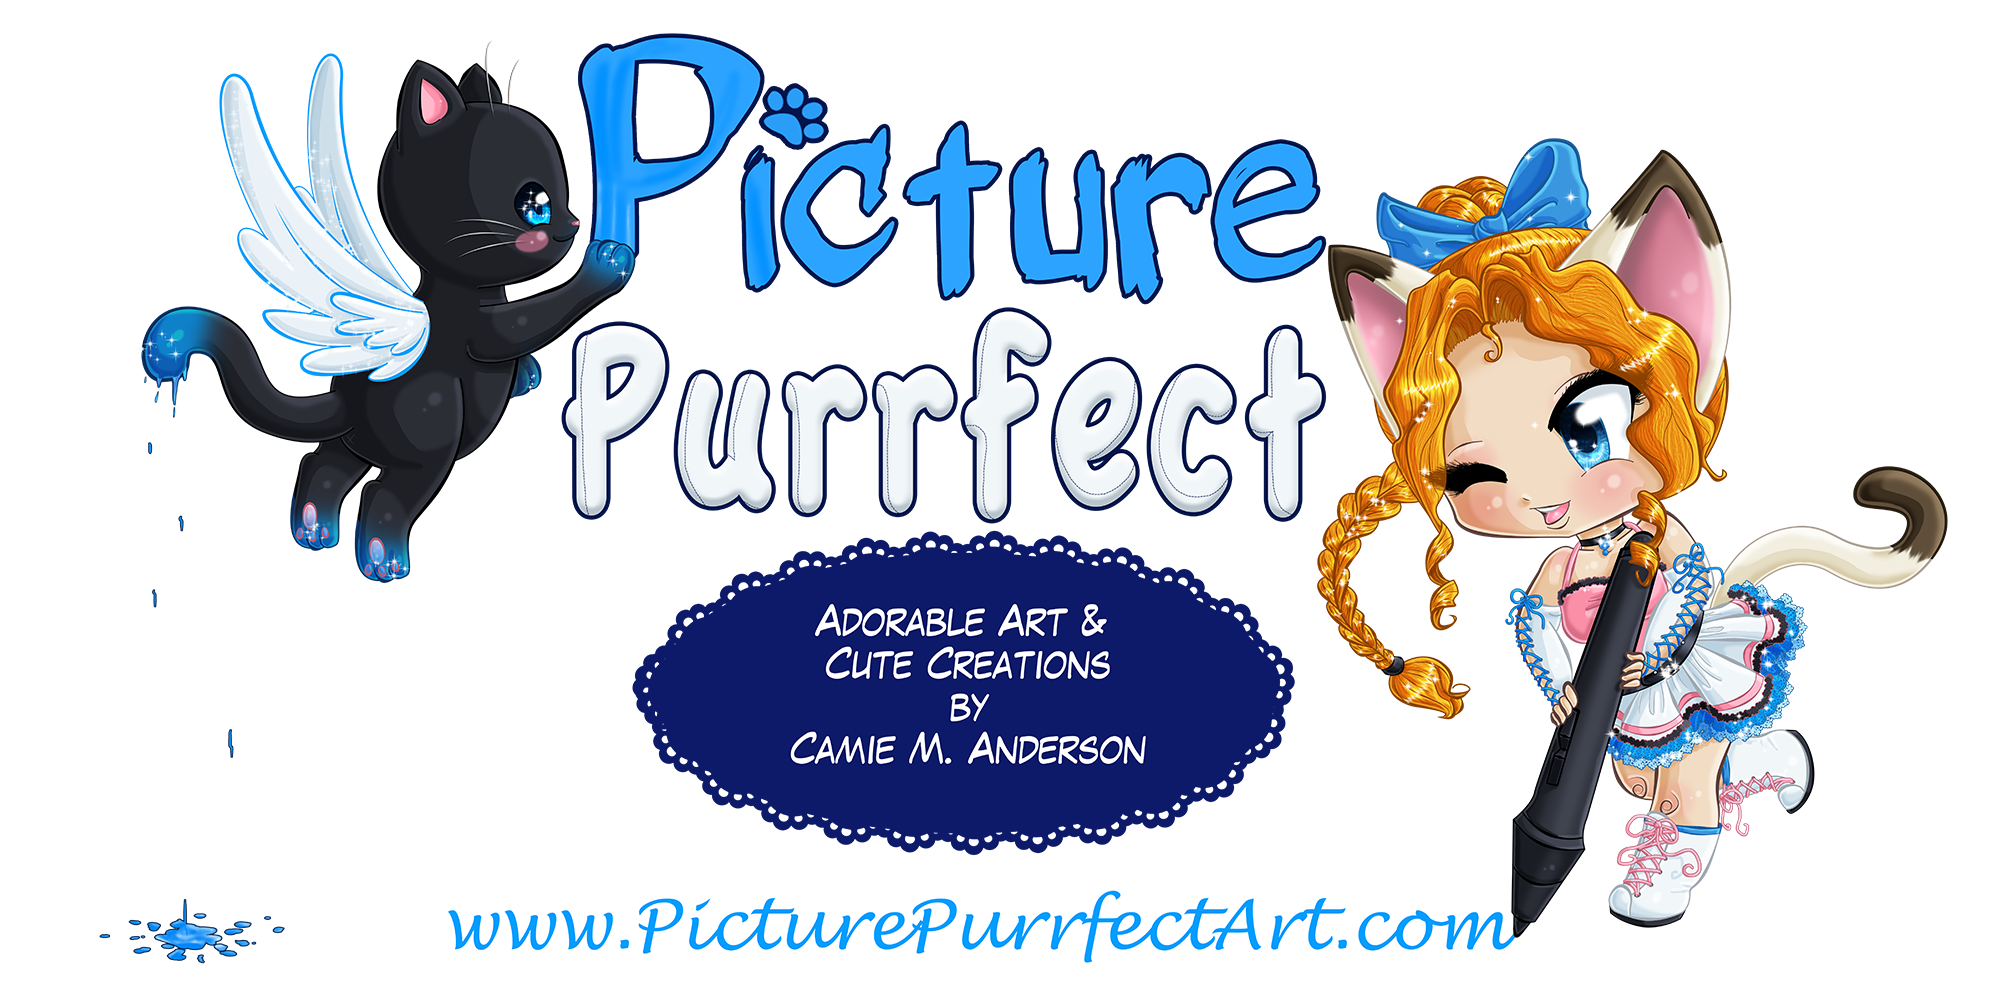 Picture Purrfect Art